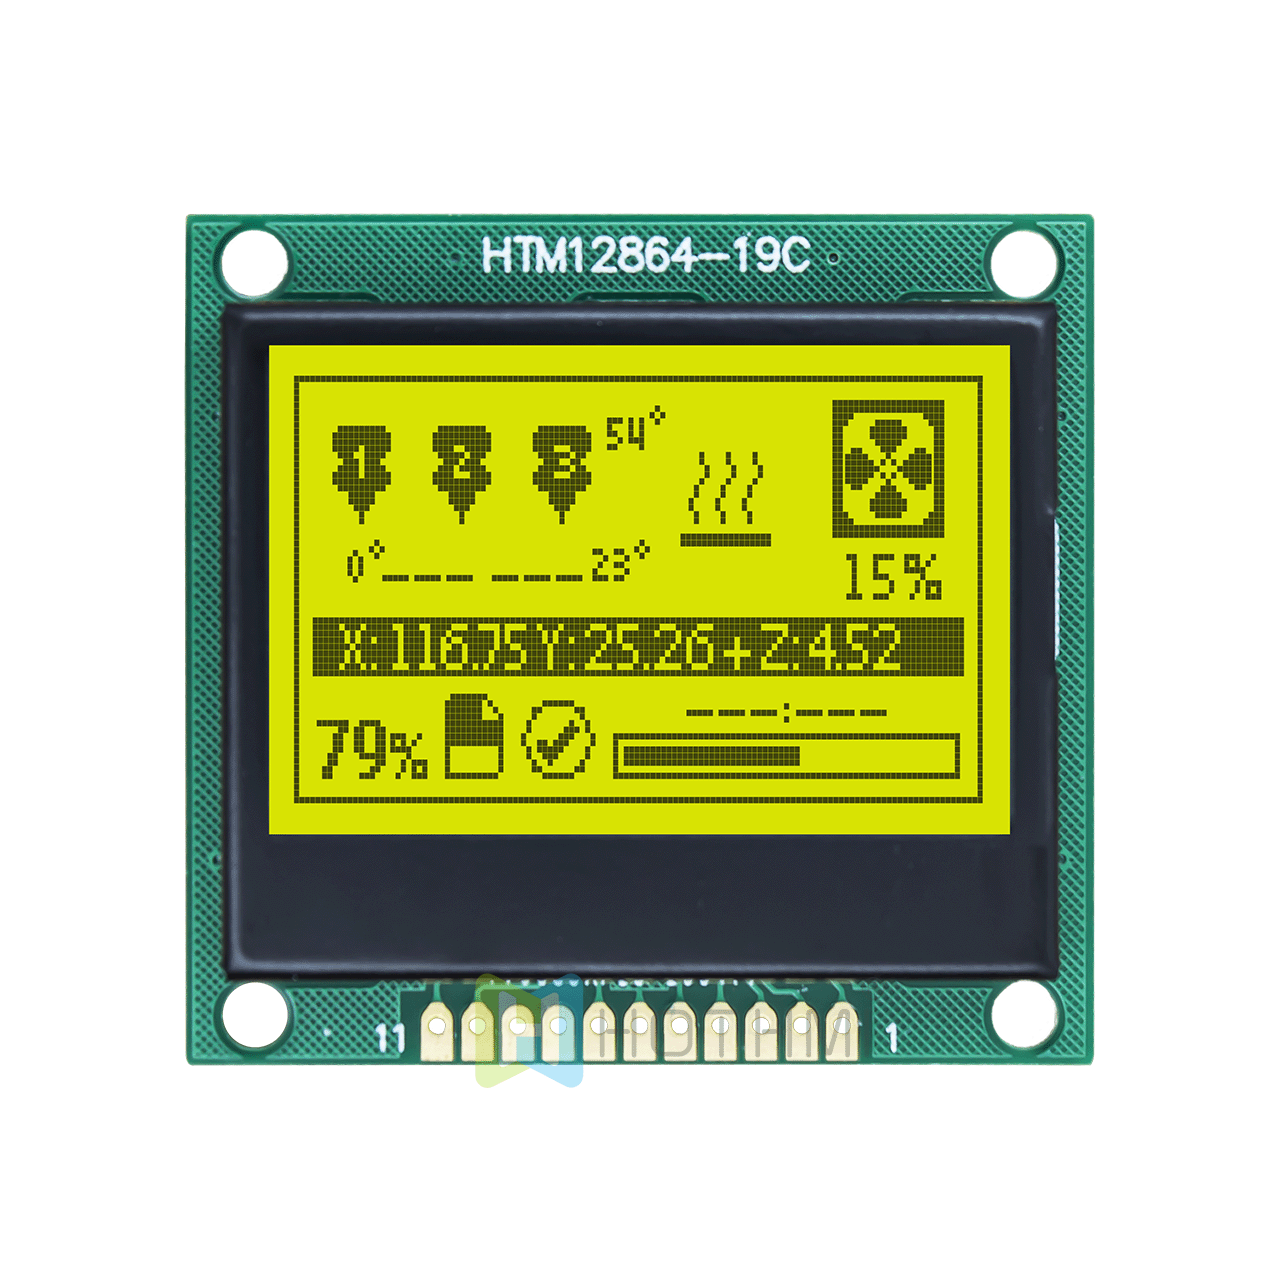 1.7-inch 128 x 64 LCD graphic display | STN front display yellow-green backlight | SPI interface | Adruino